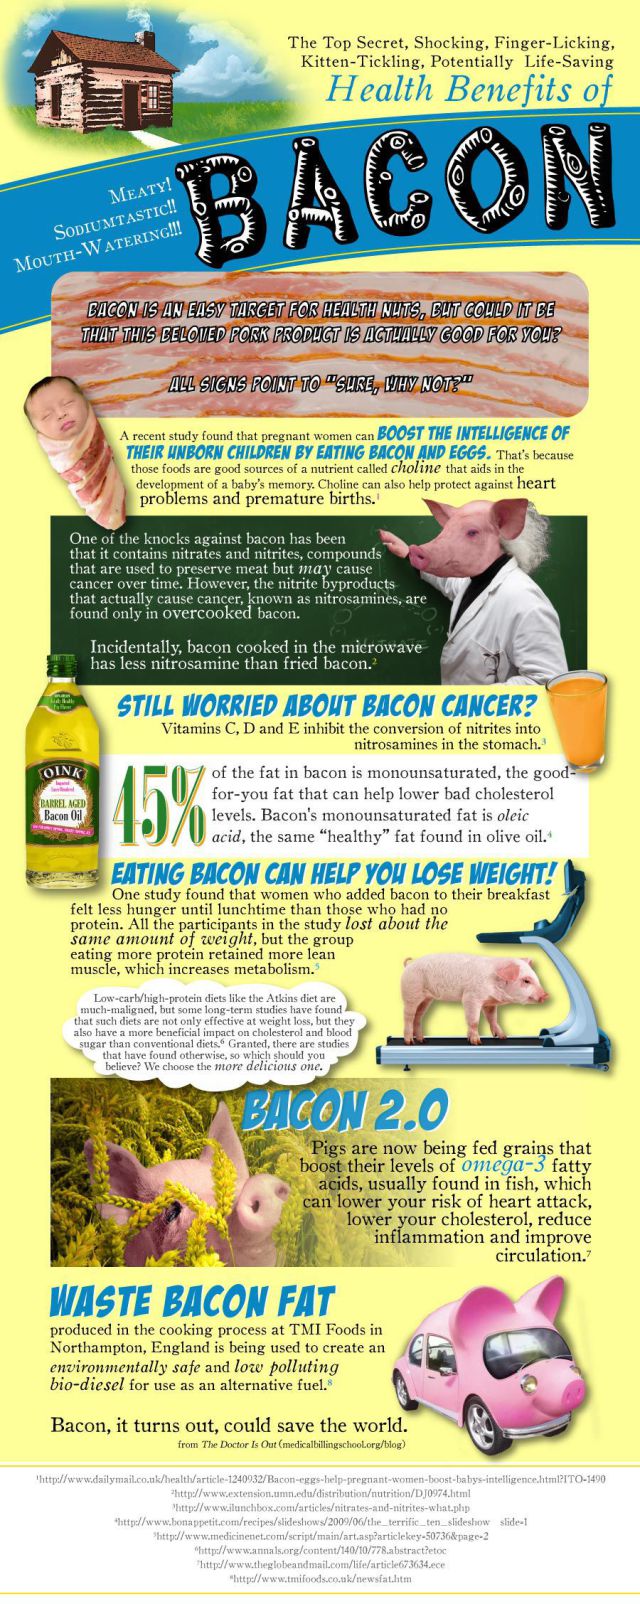 The Health Benefits of Bacon (1 pic)